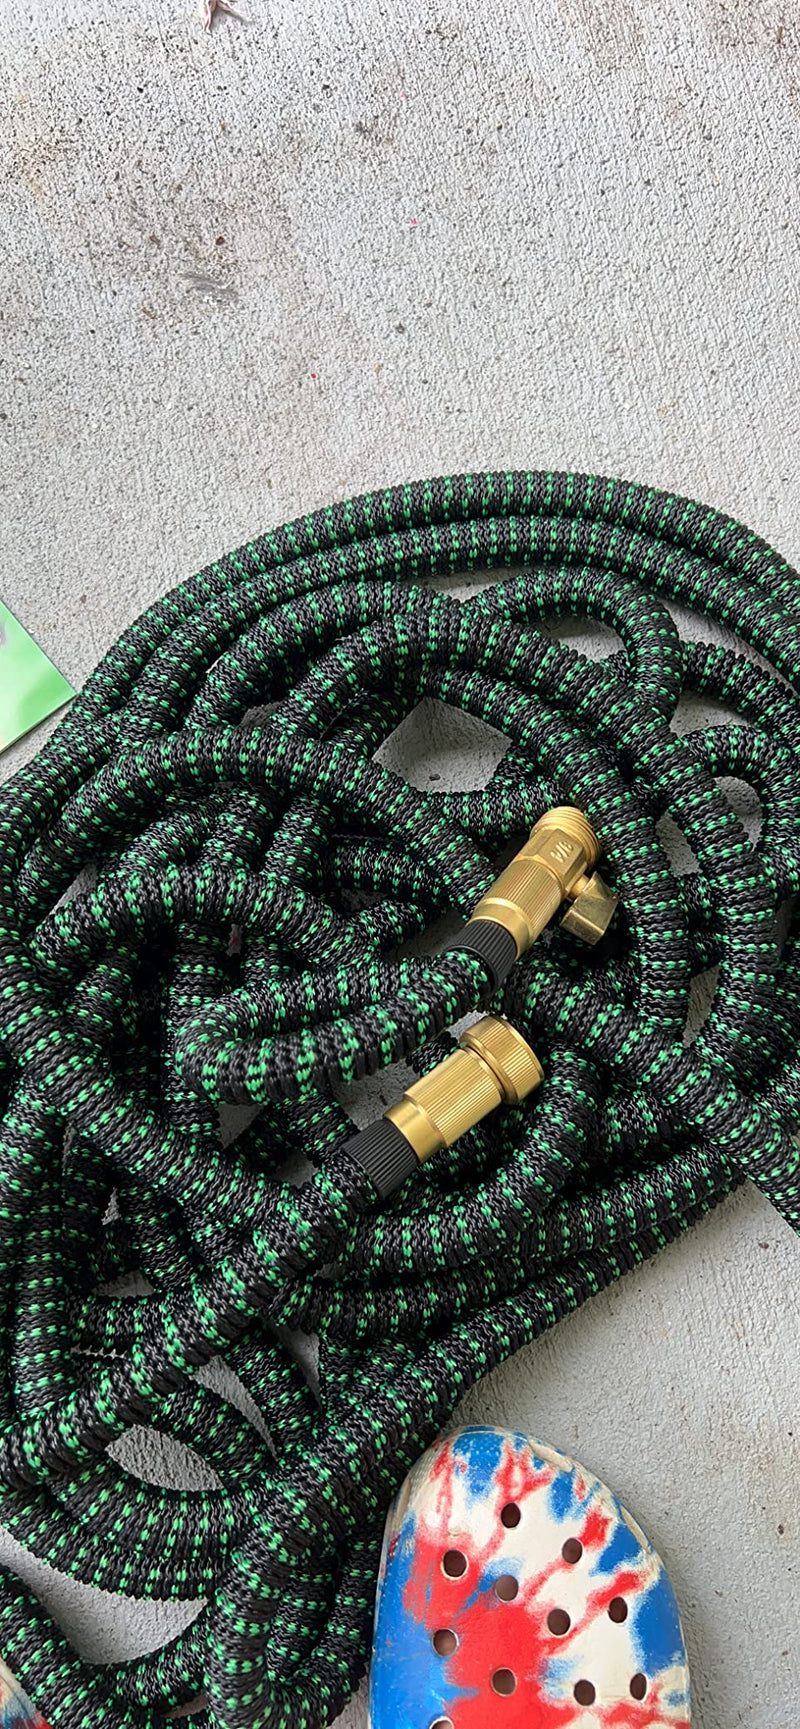 How the Best Expandable Garden Hose 100ft Leads the Watering Trends